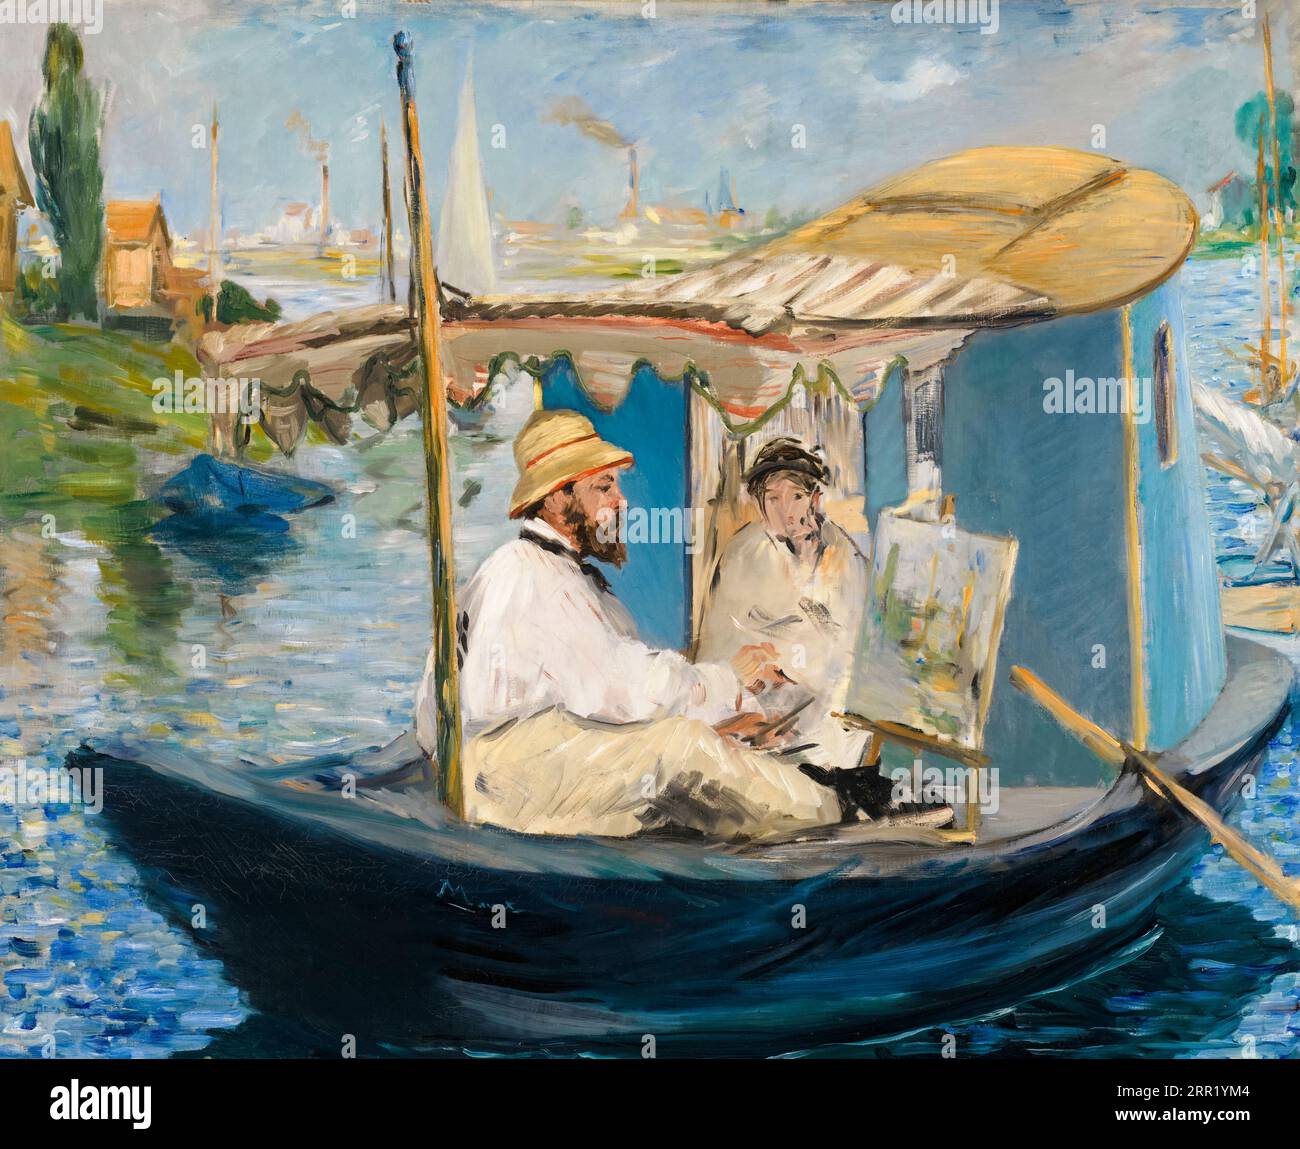 Claude Monet painting in his studio boat, portrait painting in oil on canvas by Edouard Manet, 1874 Stock Photo